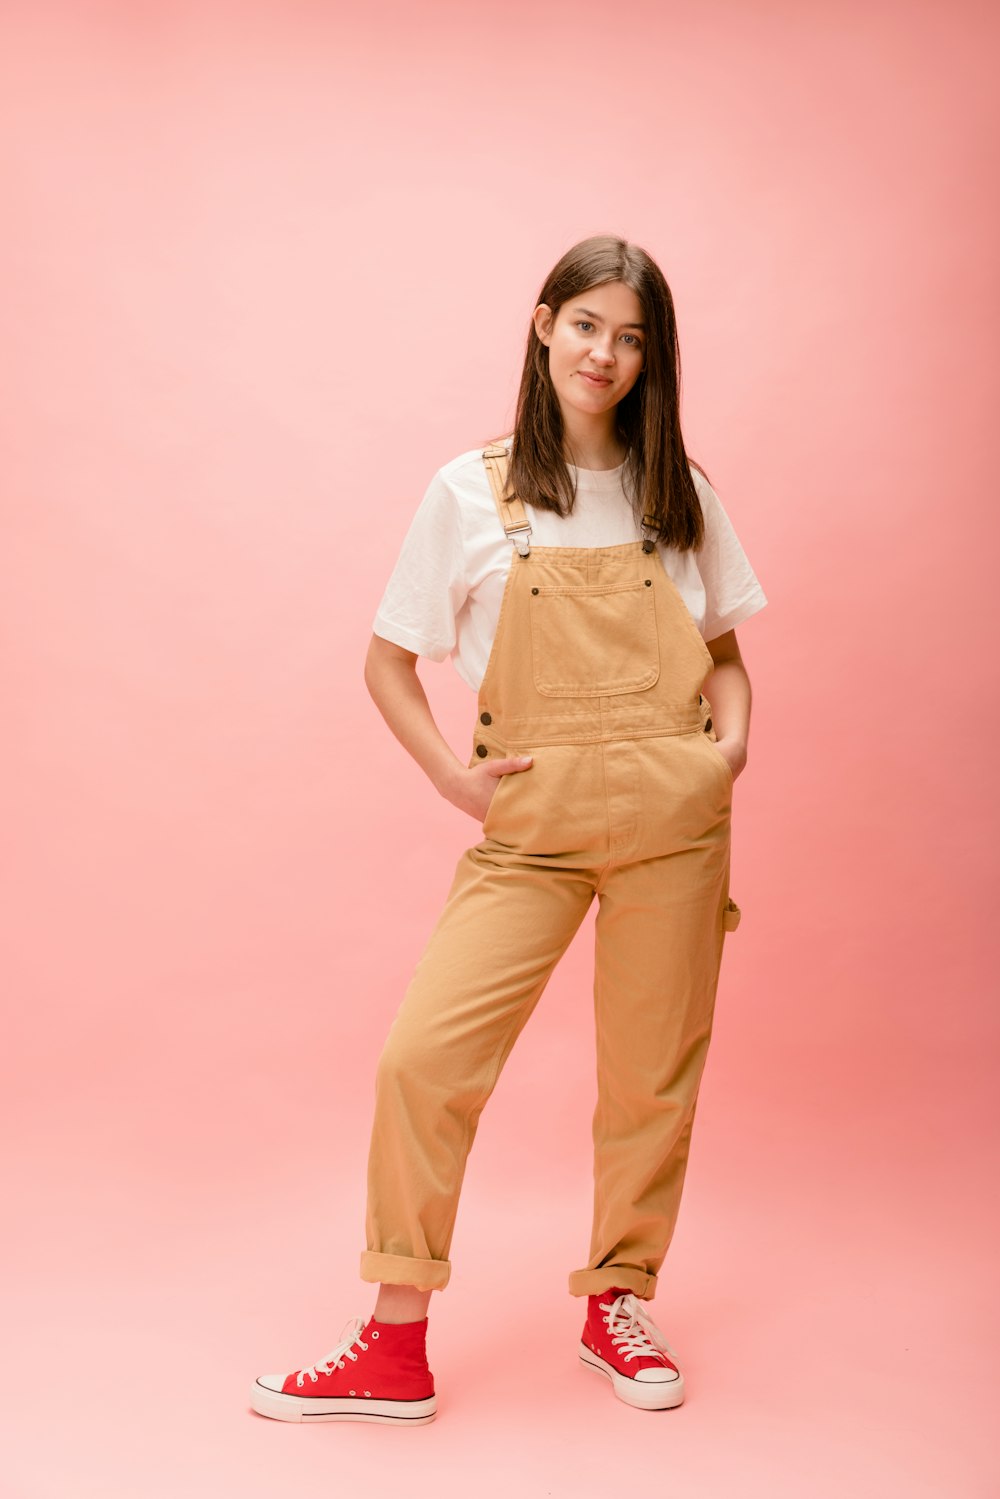 a woman in a white shirt and tan overalls